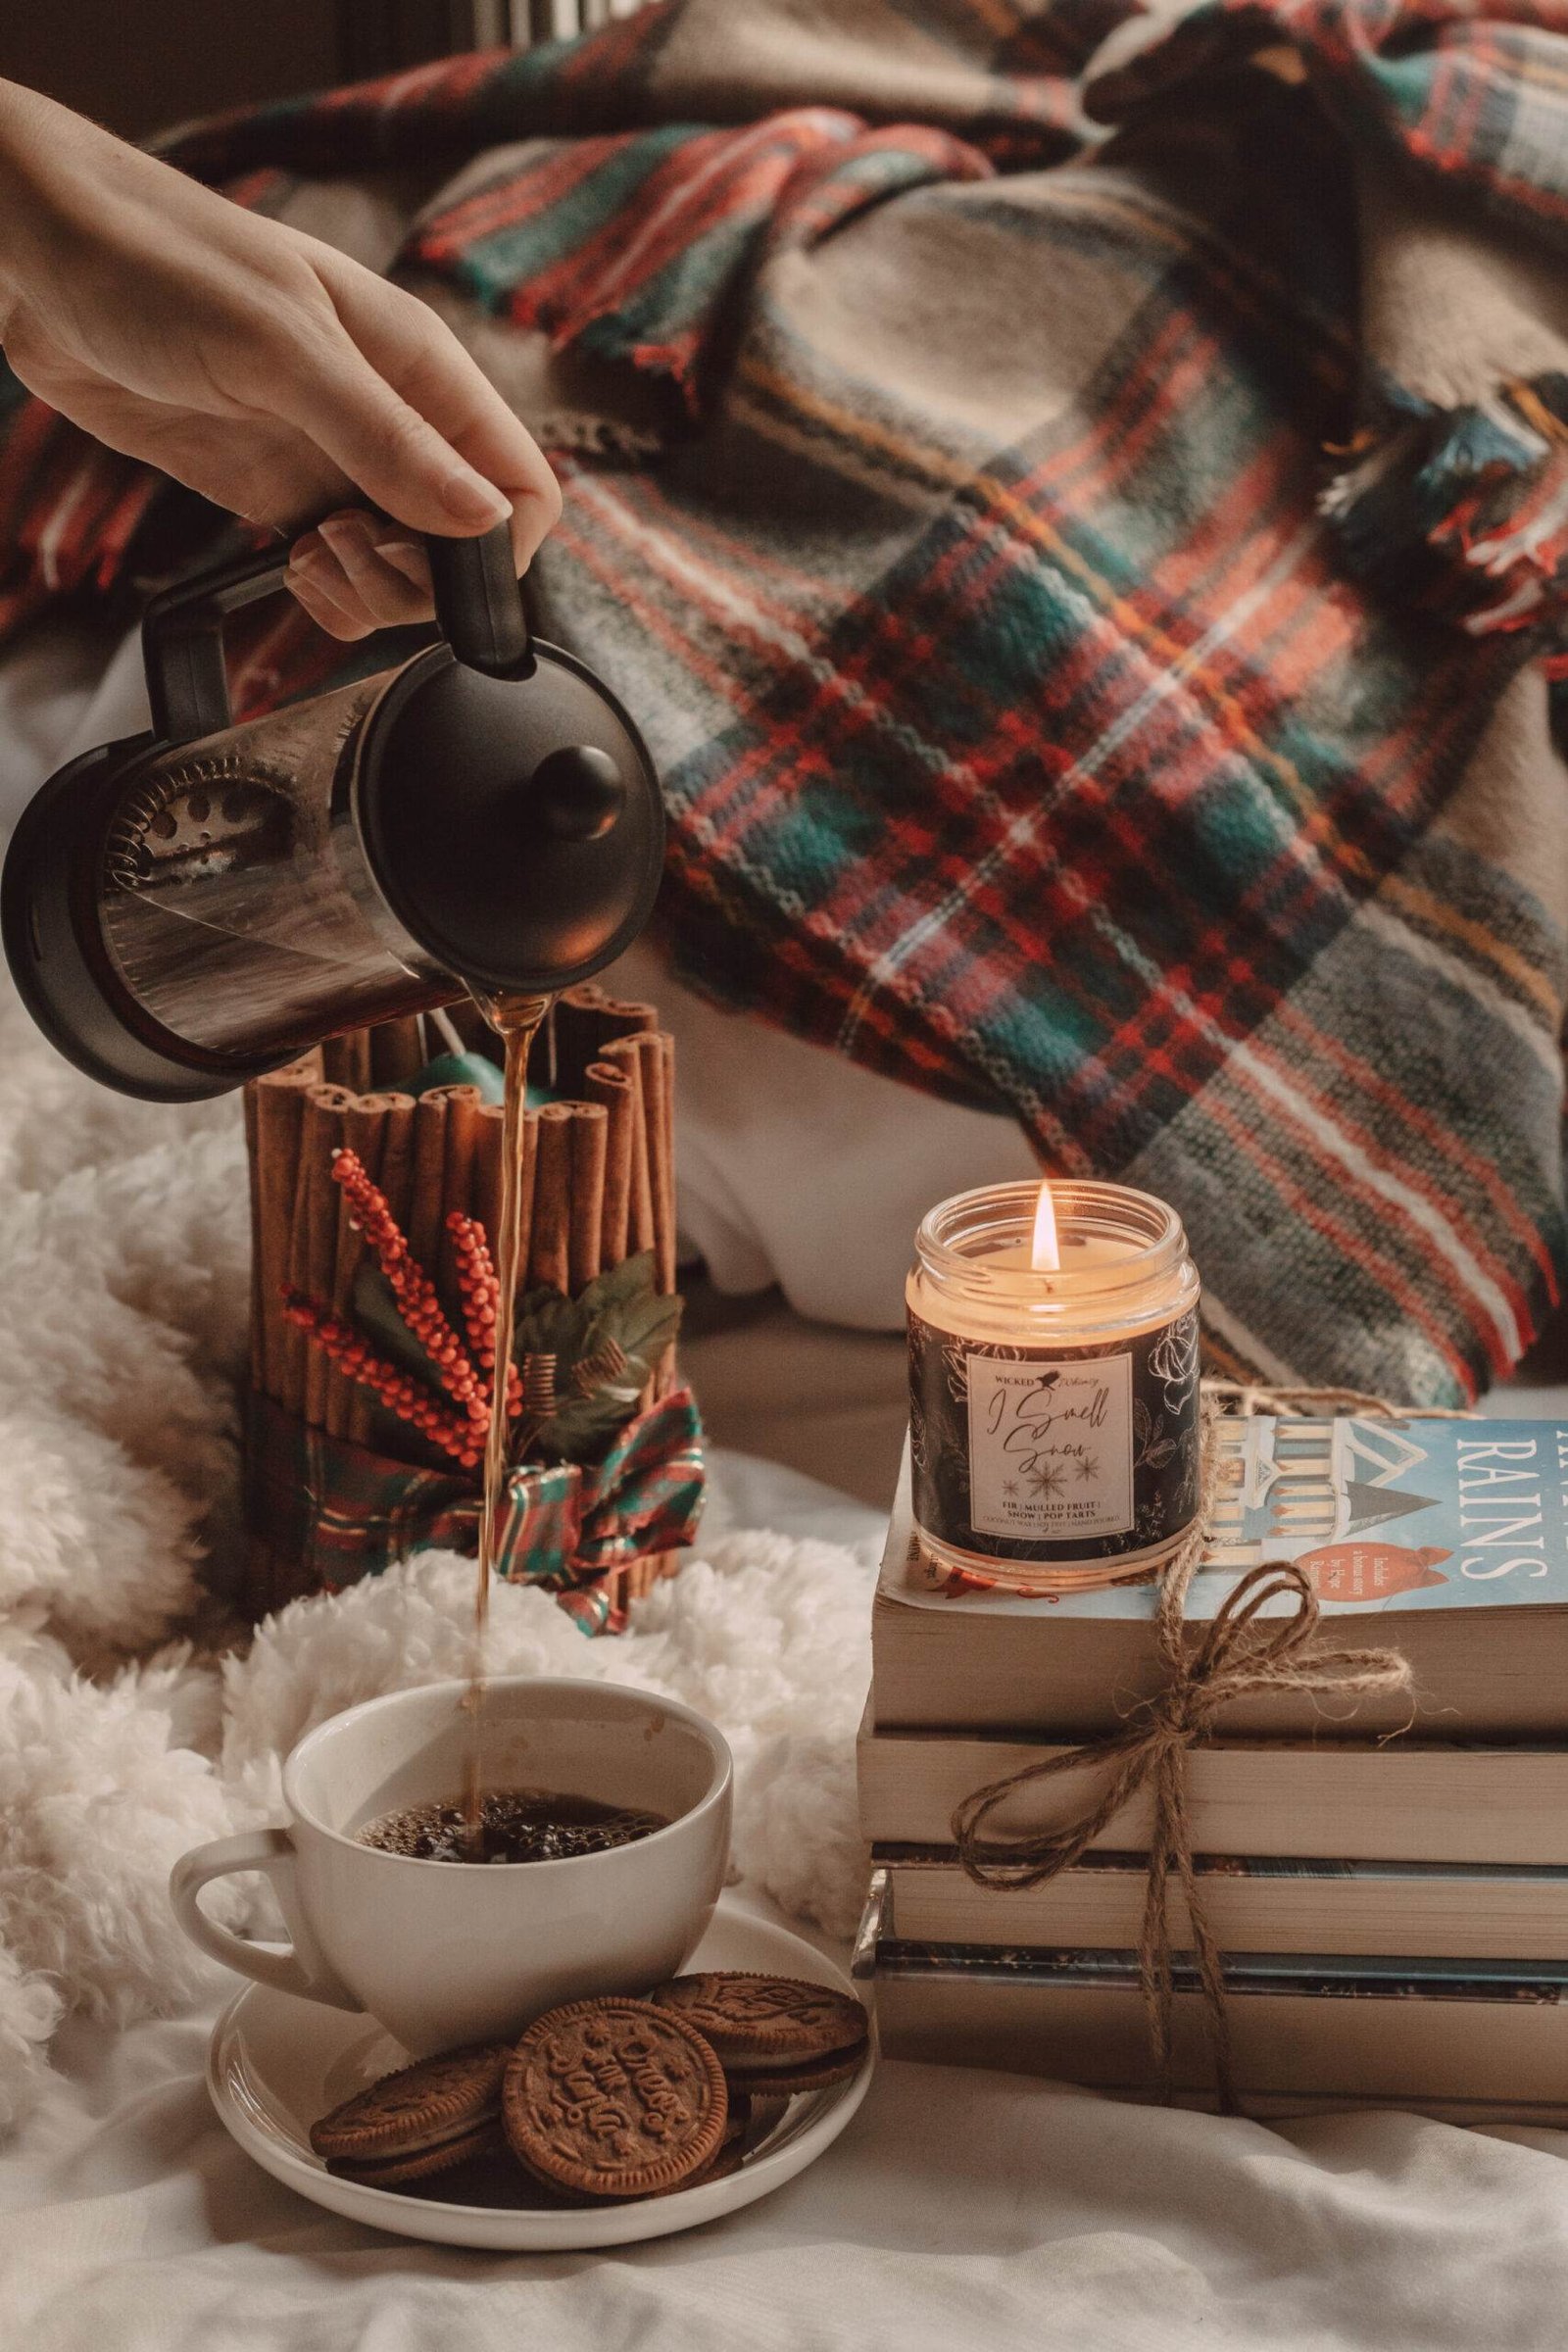 Why Finding Christmas Is the Perfect Holiday Book by The Espresso Edition cozy book and lifestyle blog